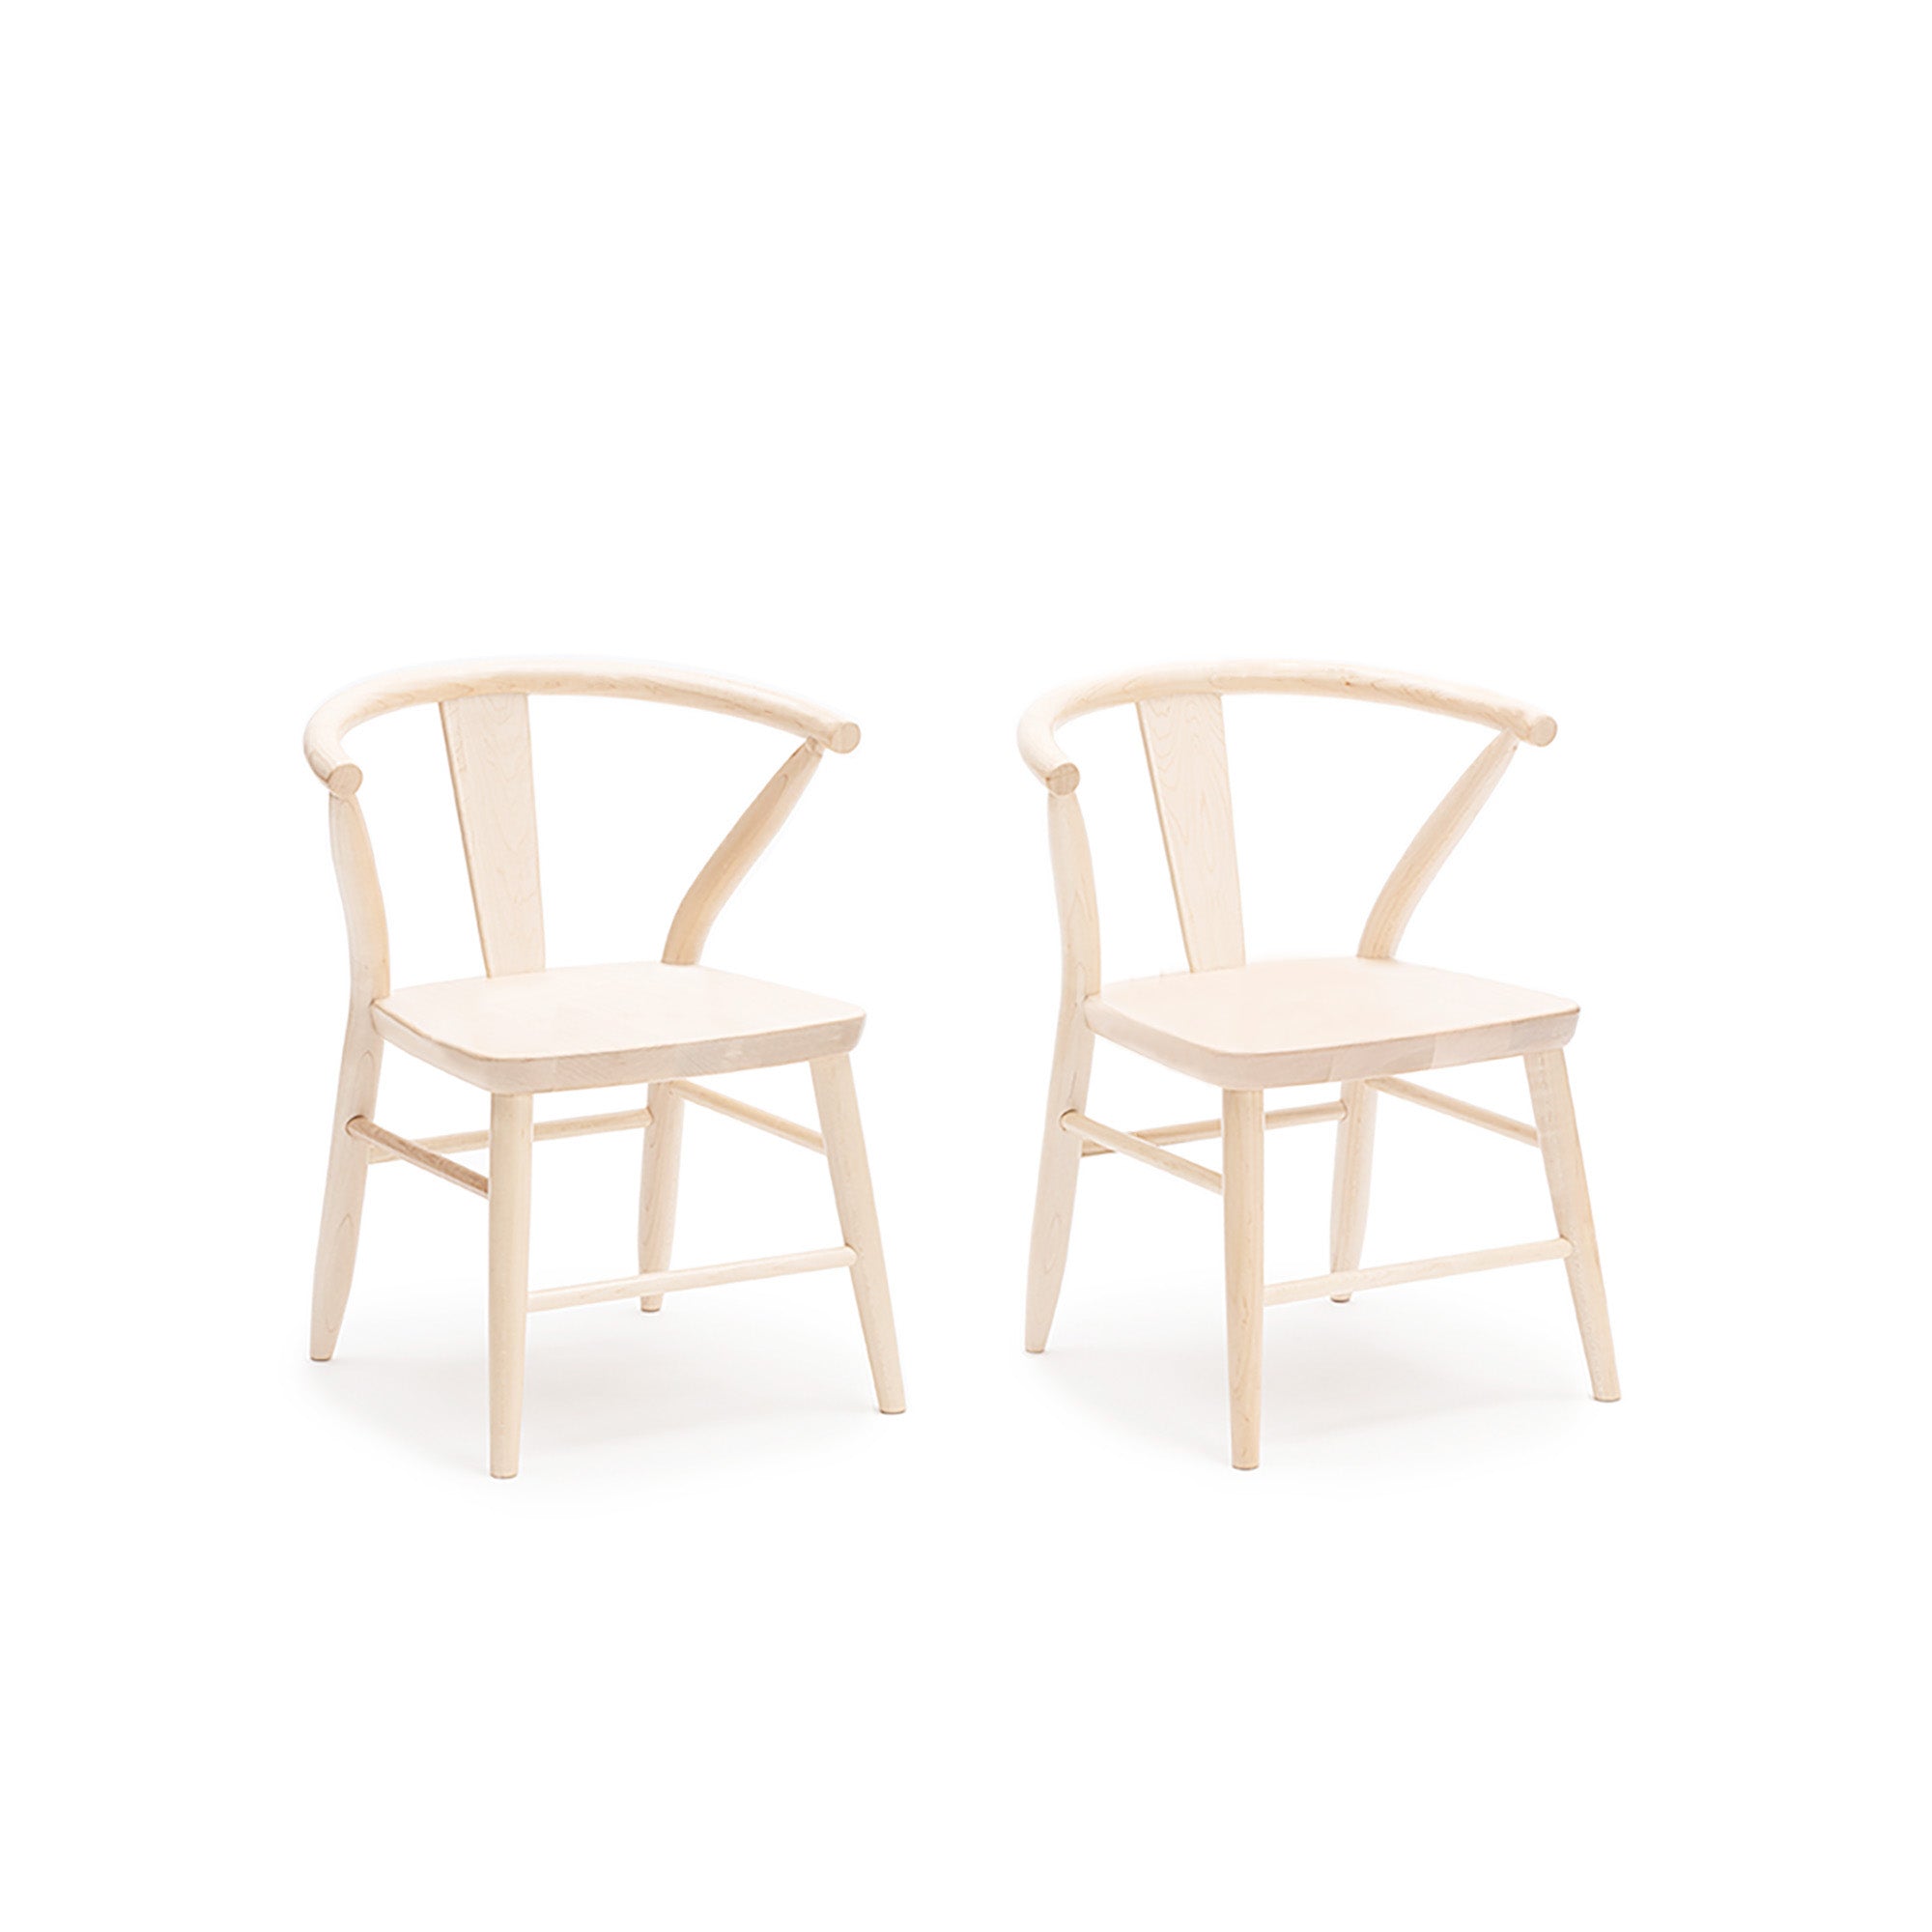 Unfinished Crescent Chairs, Set of 2